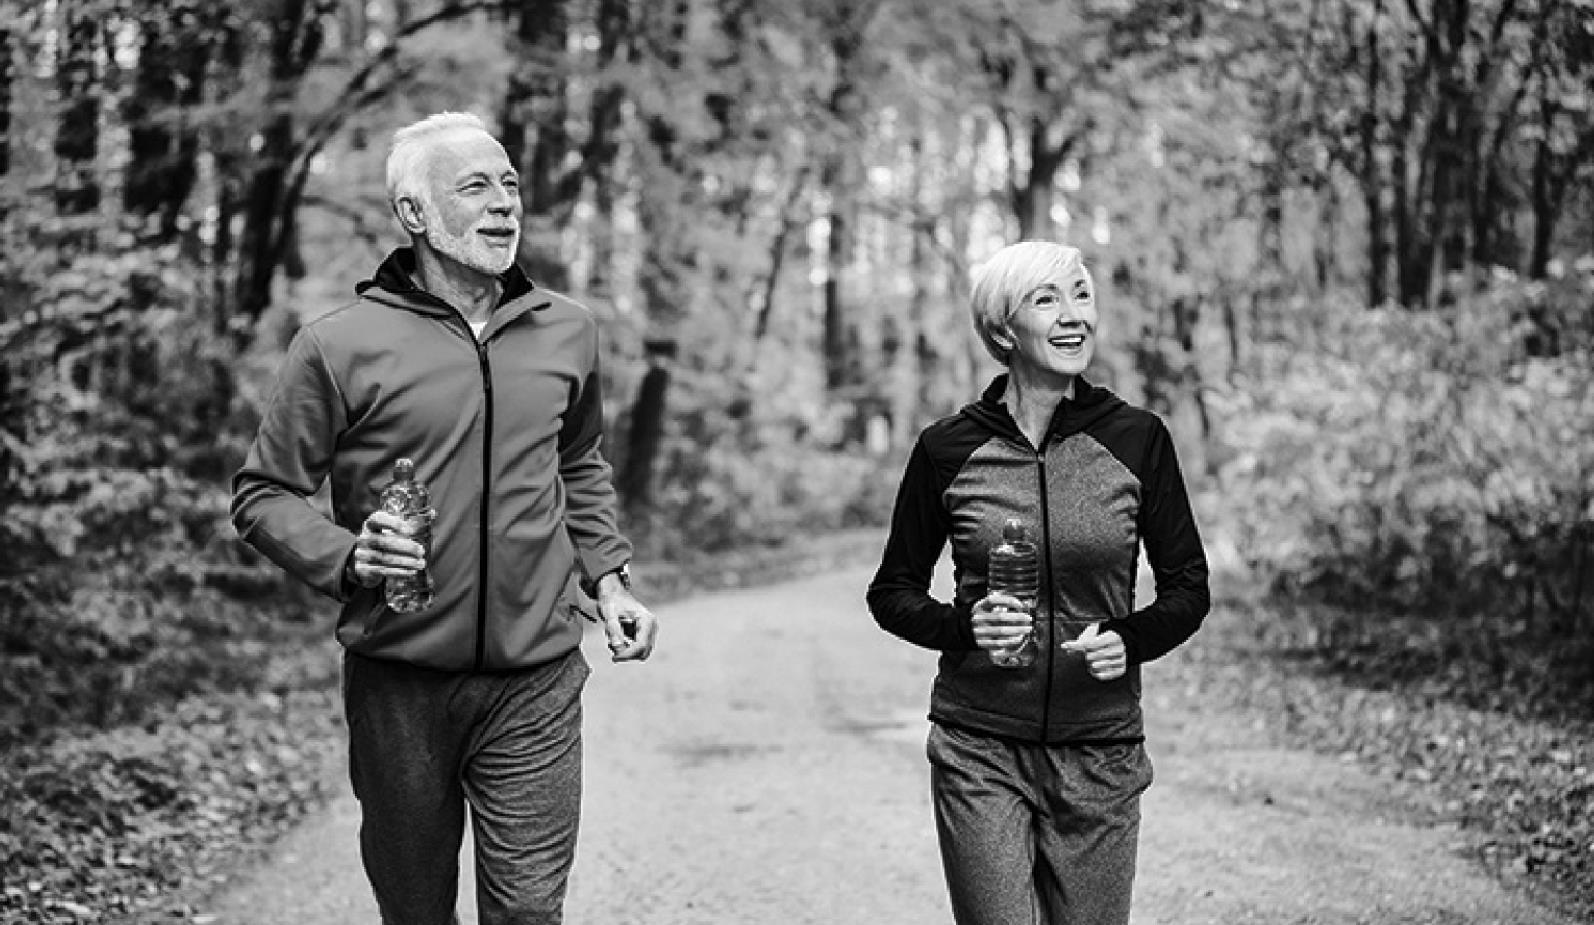 The many ways walking benefits your body